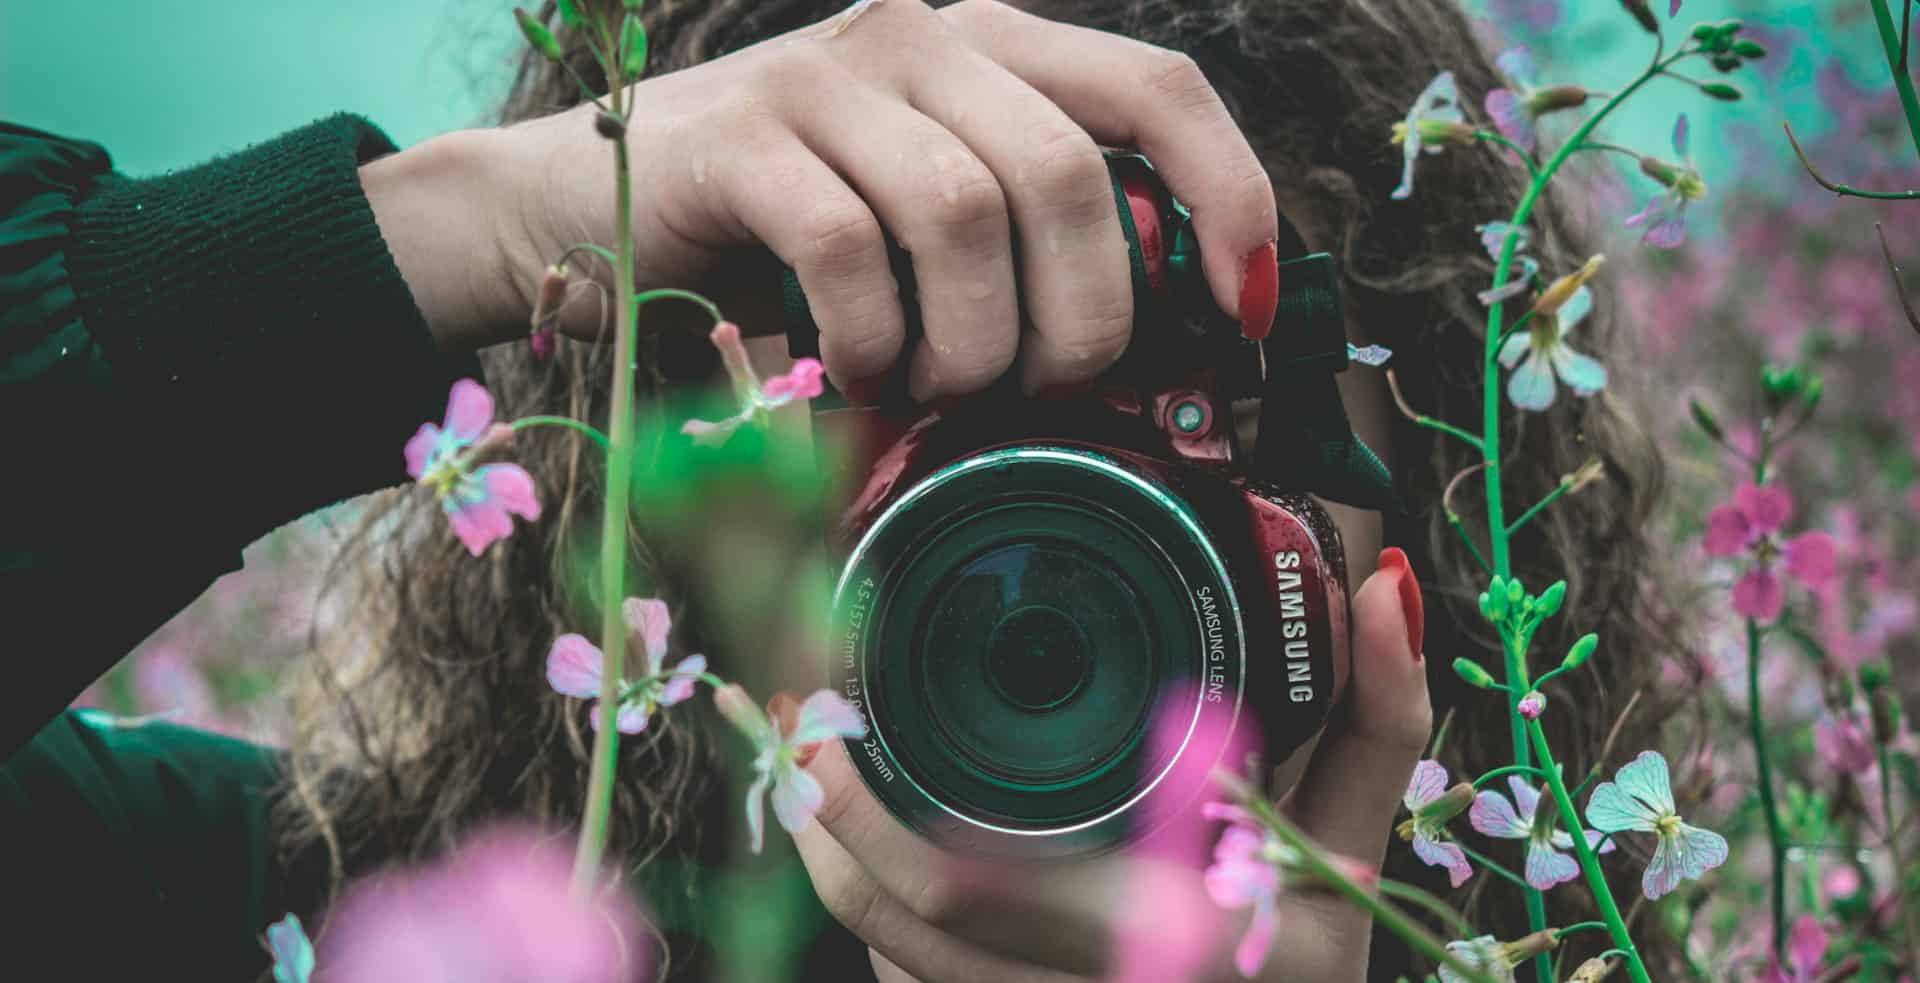 Woman using a camera through flowers to take photo